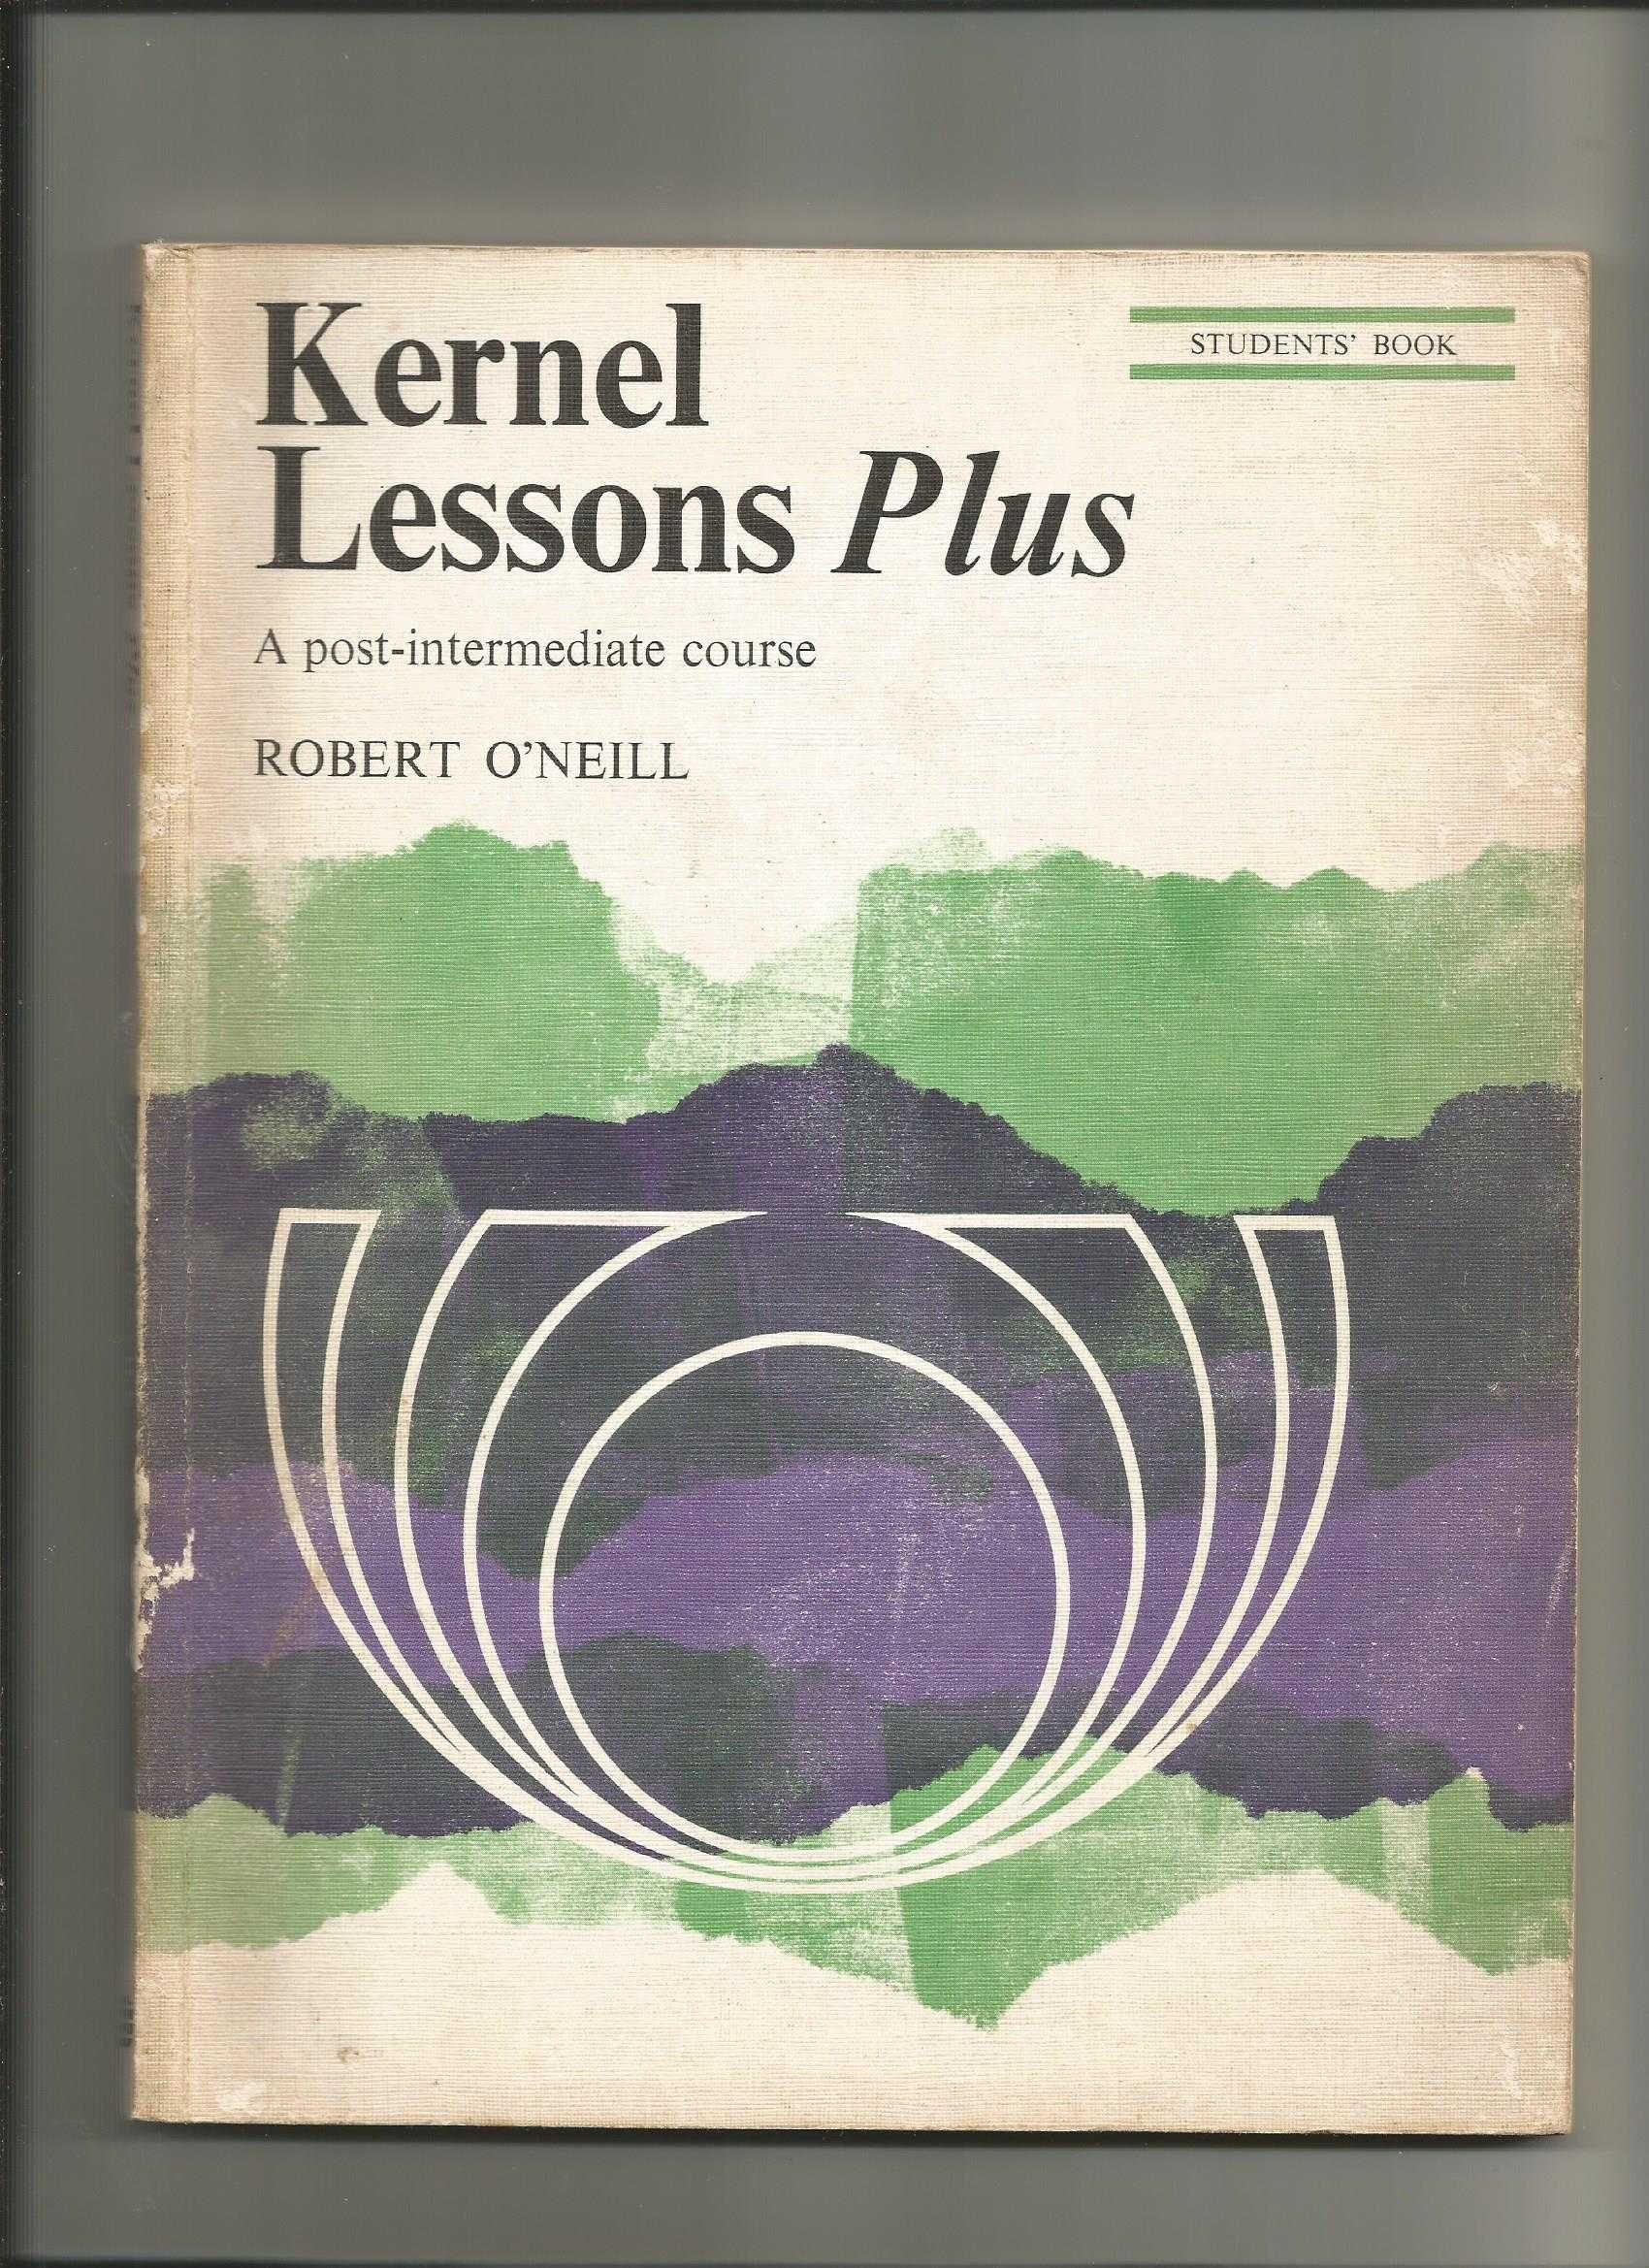 Kernel Lessons Plus - Robert O´neill - Students Book - ENG